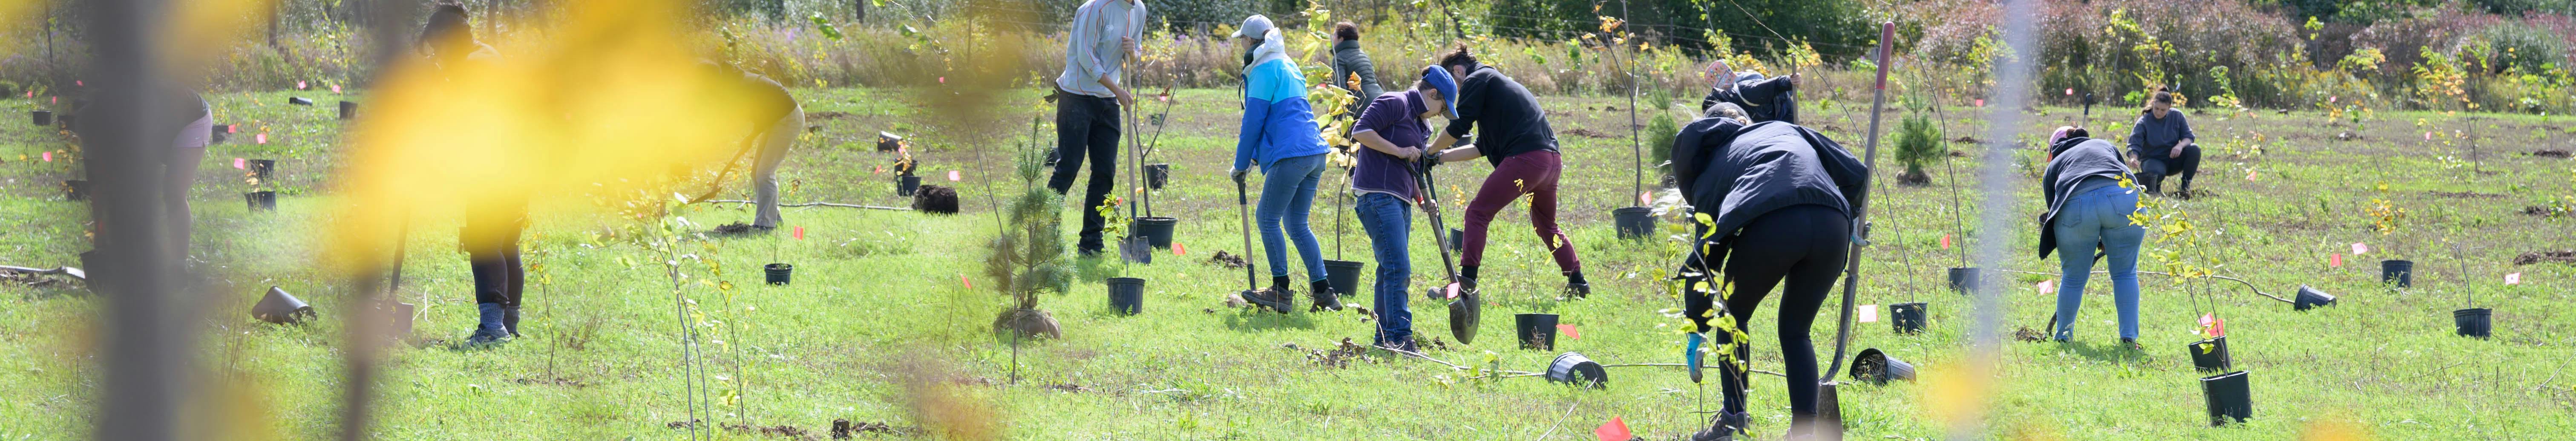 Students planting trees in field